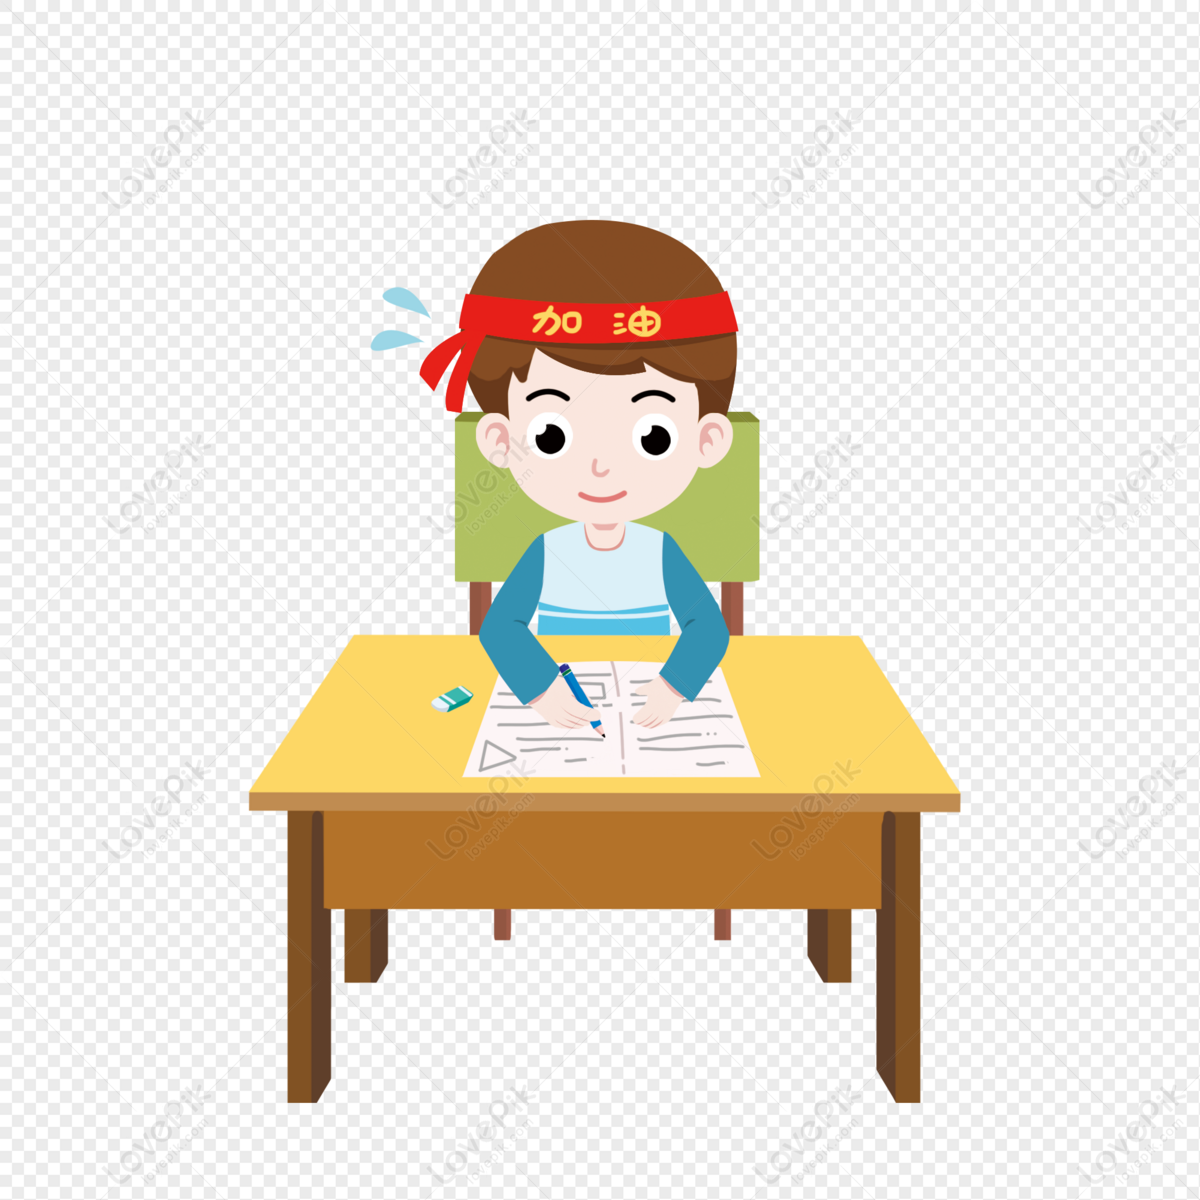 Kid Exam Efforts Cartoon Elements PNG Image And Clipart Image For Free  Download - Lovepik | 401933398